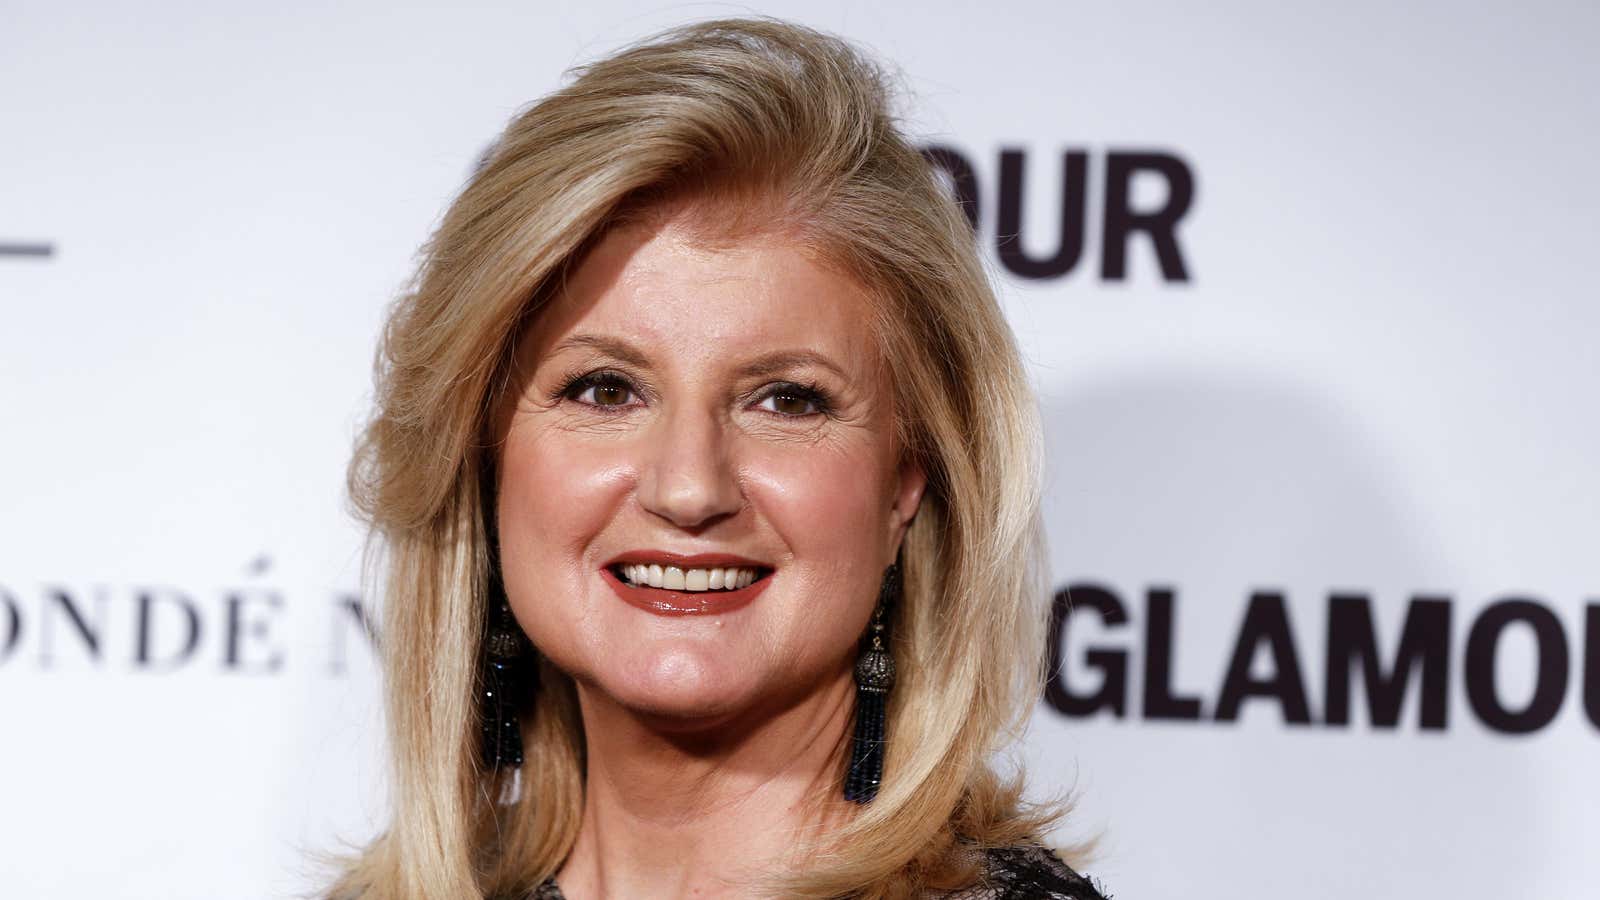 Arianna Huffington is the only woman on Uber’s board.